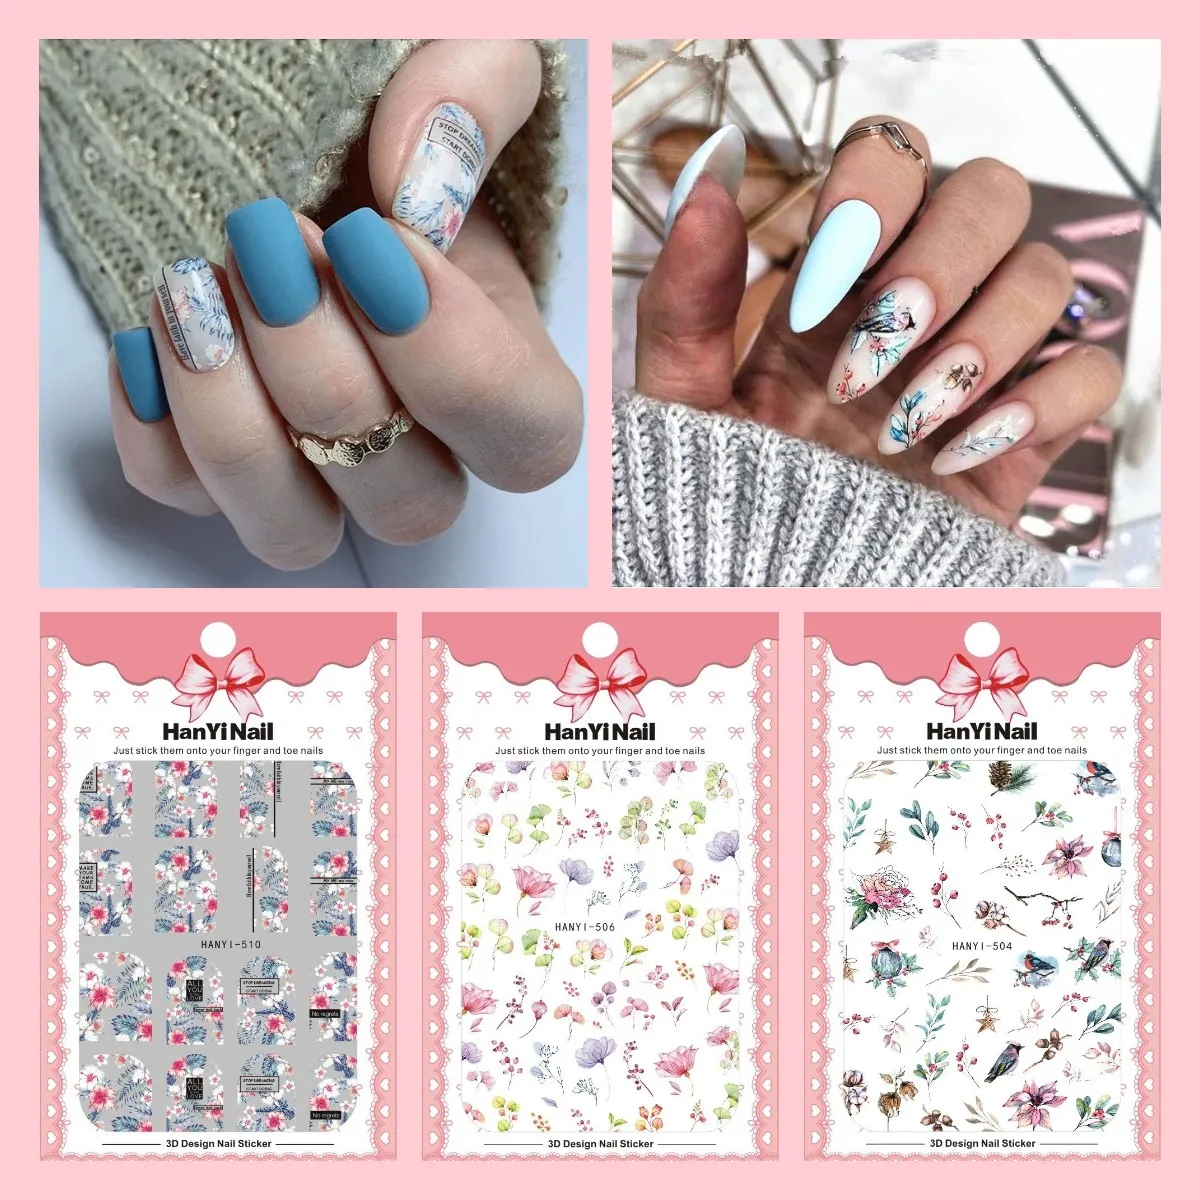 

3pcs/pack Exquisite packaging HANYI 503-511 Big Nail Stickers Spring Flowers 3D Nail Enhancement Sticker With Back Glue ForDIY